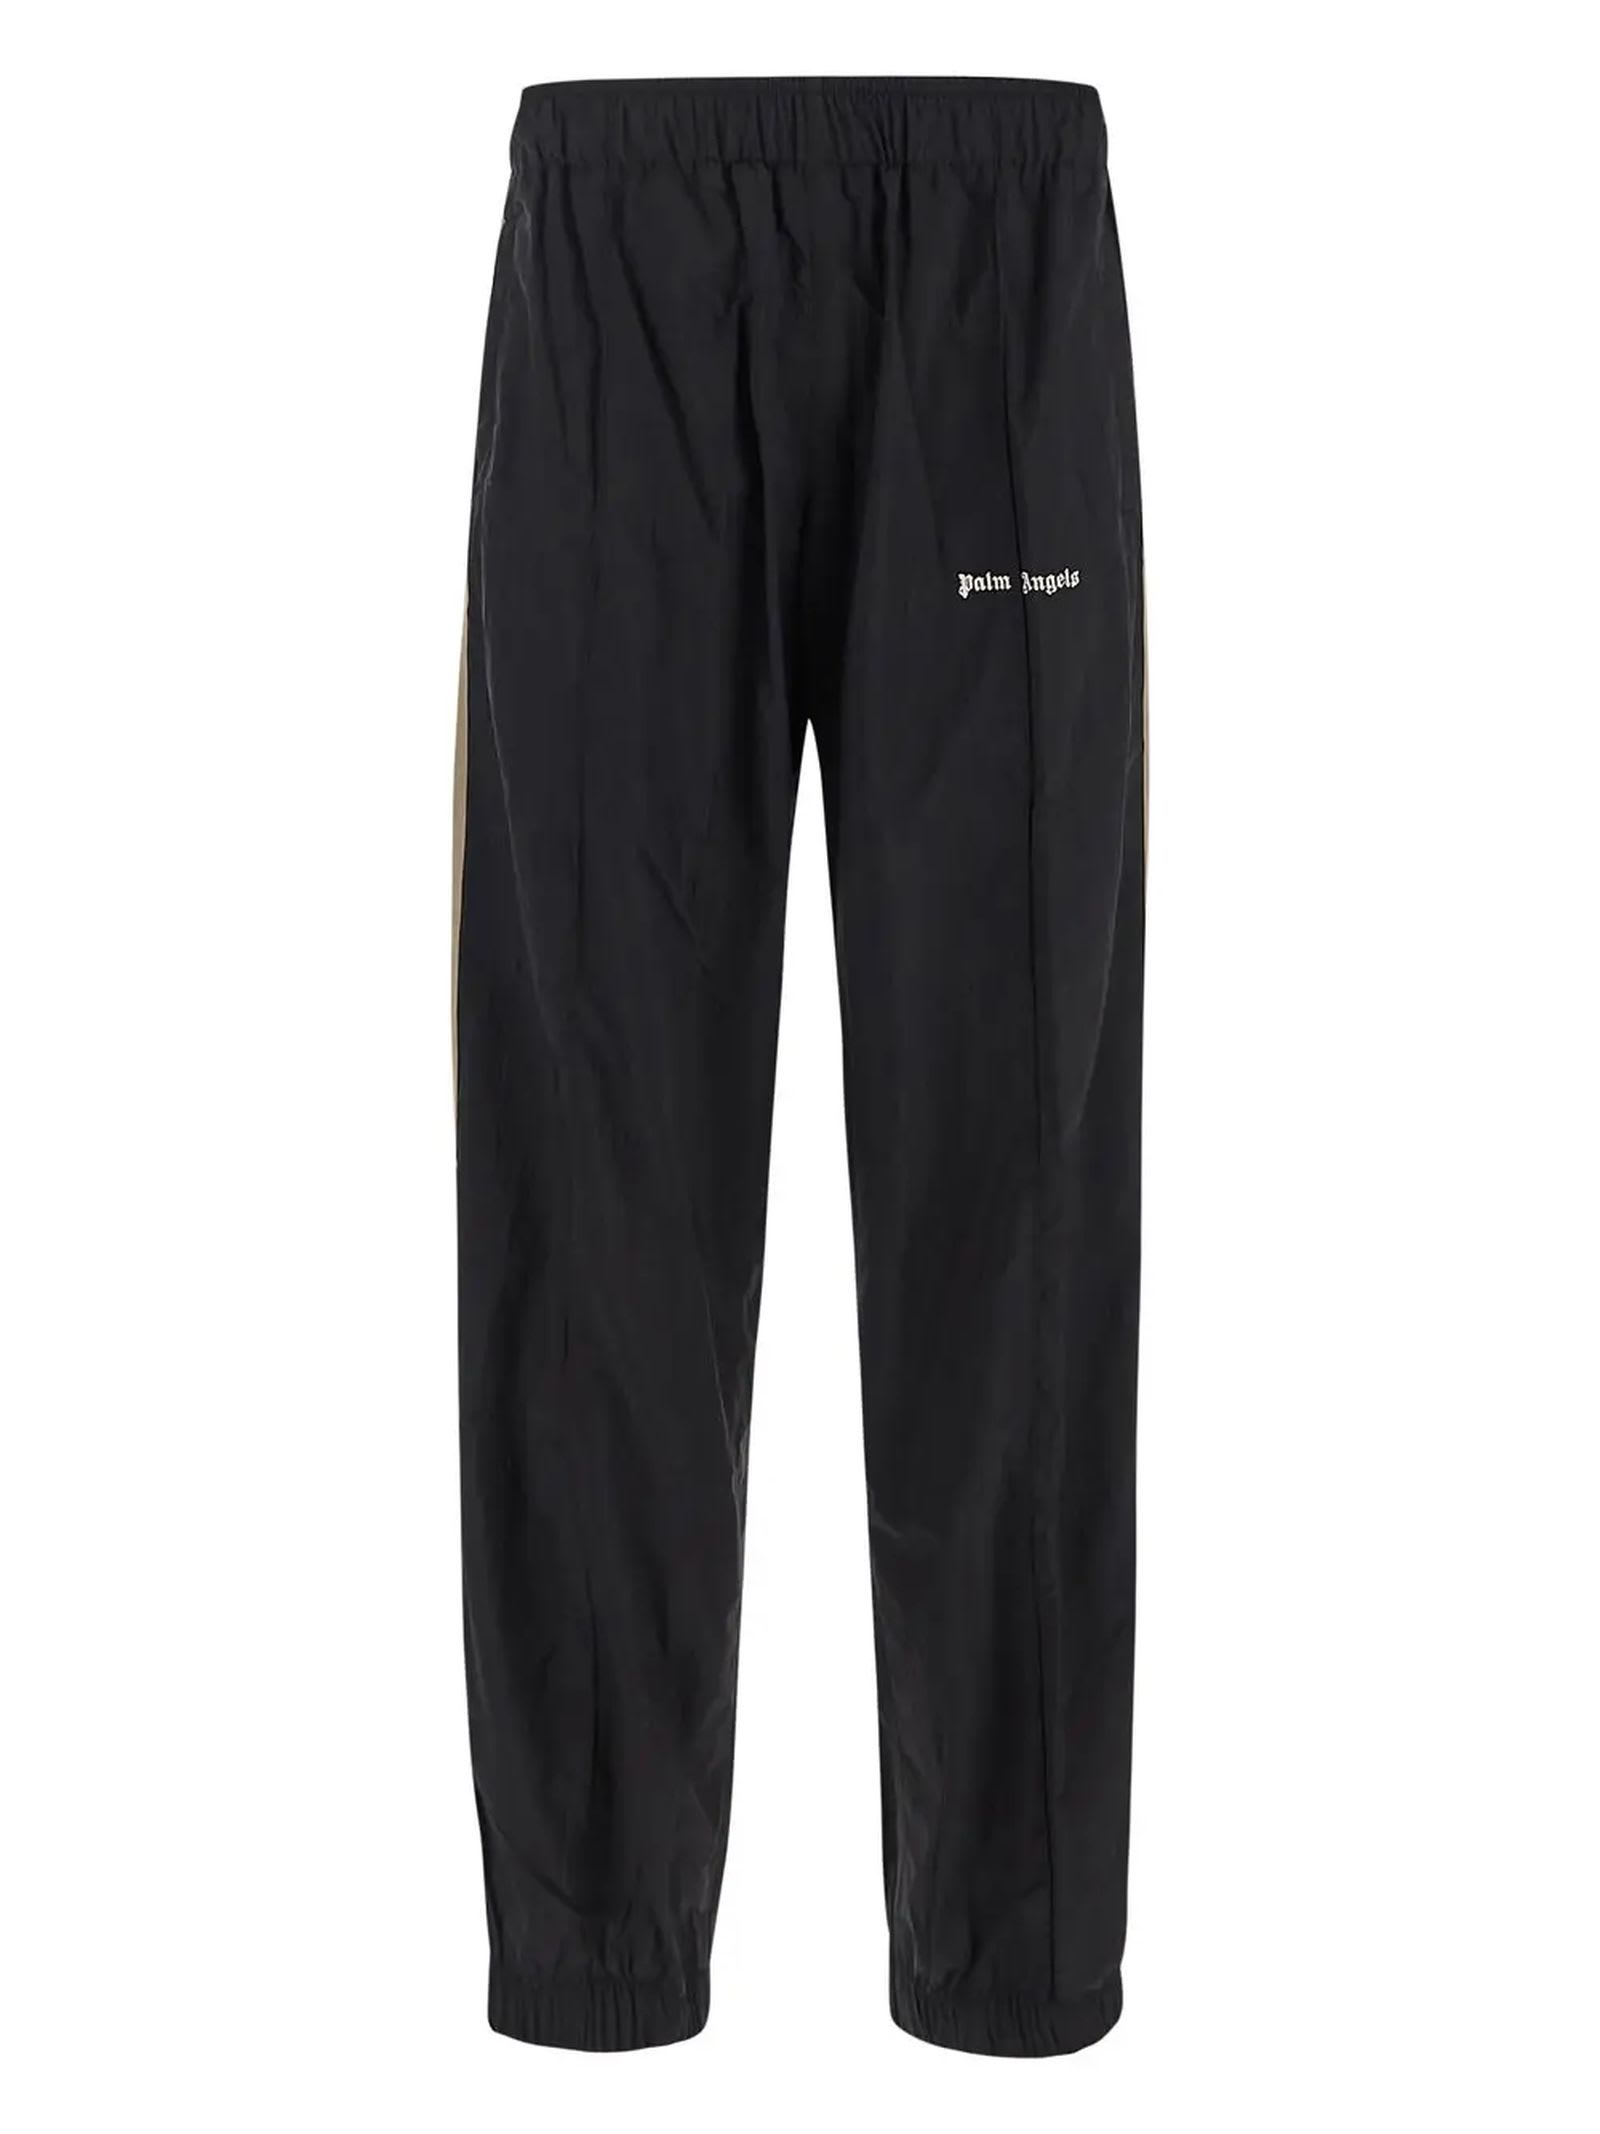 PALM ANGELS BLACK POLYESTER TROUSERS